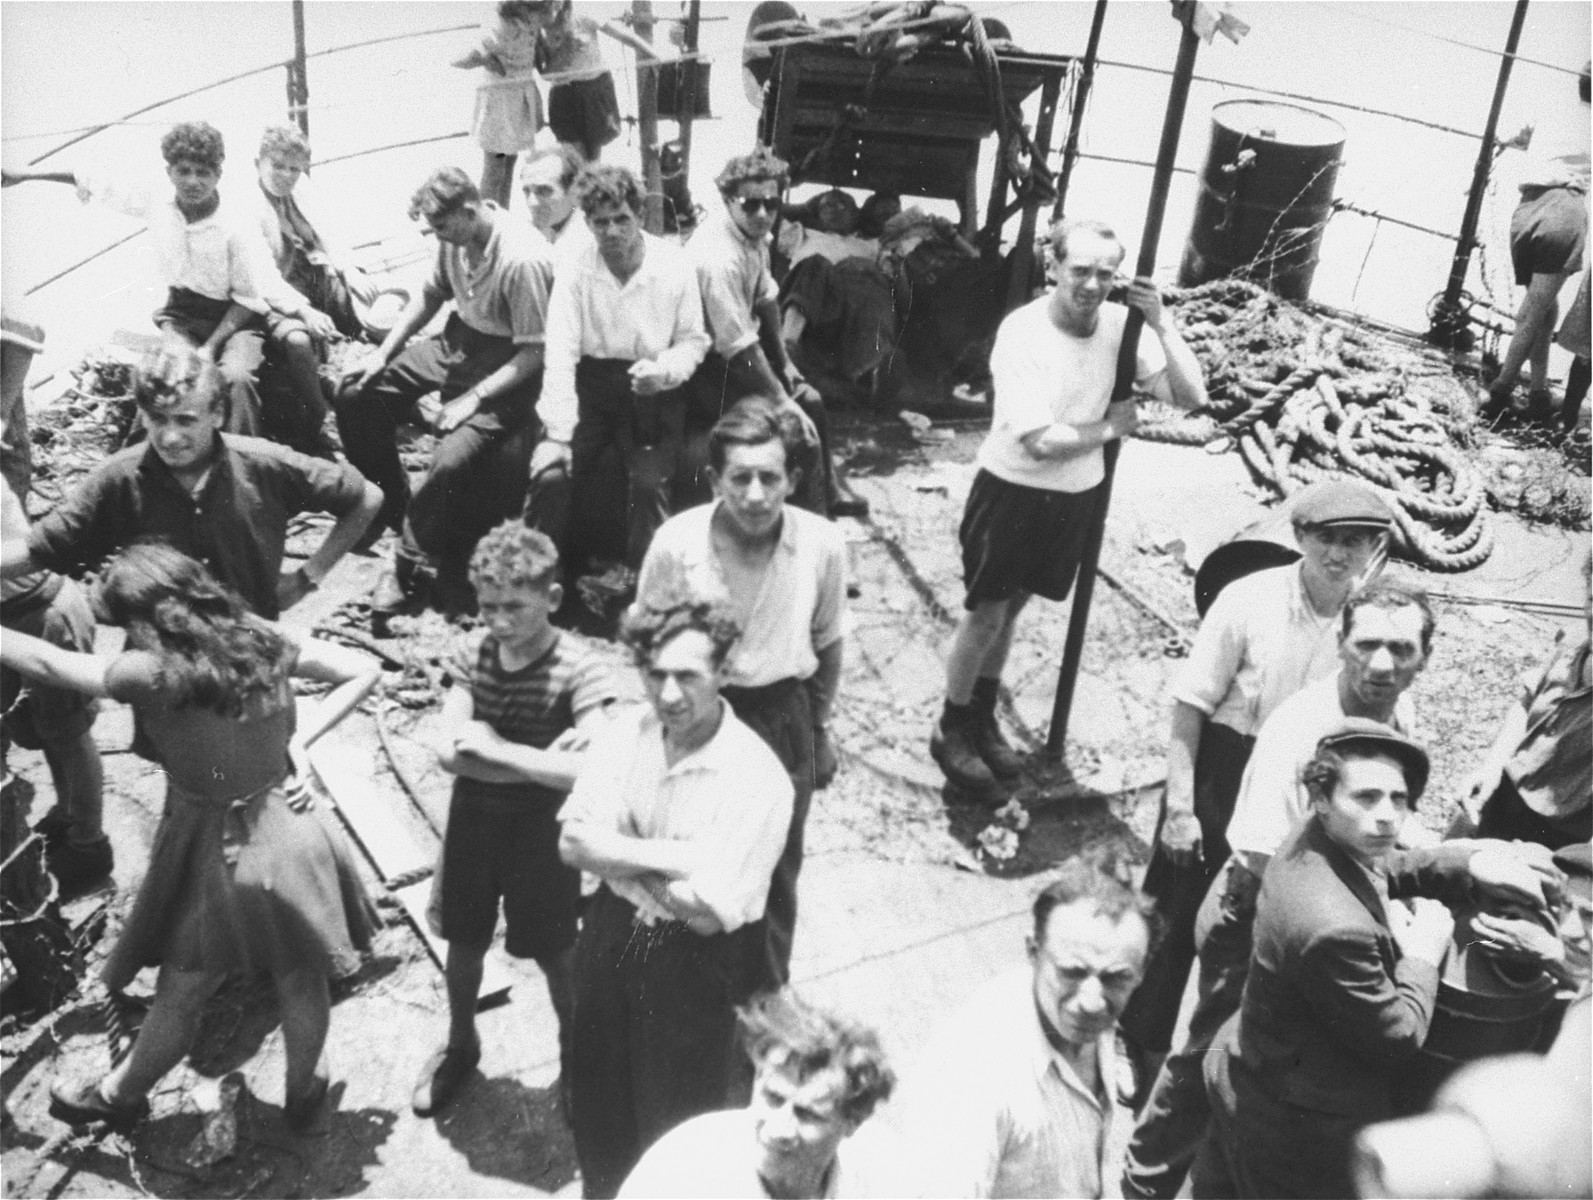 Jewish passengers stand on the deck of the Exodus 1947 amidst the debris from the previous night's struggle.